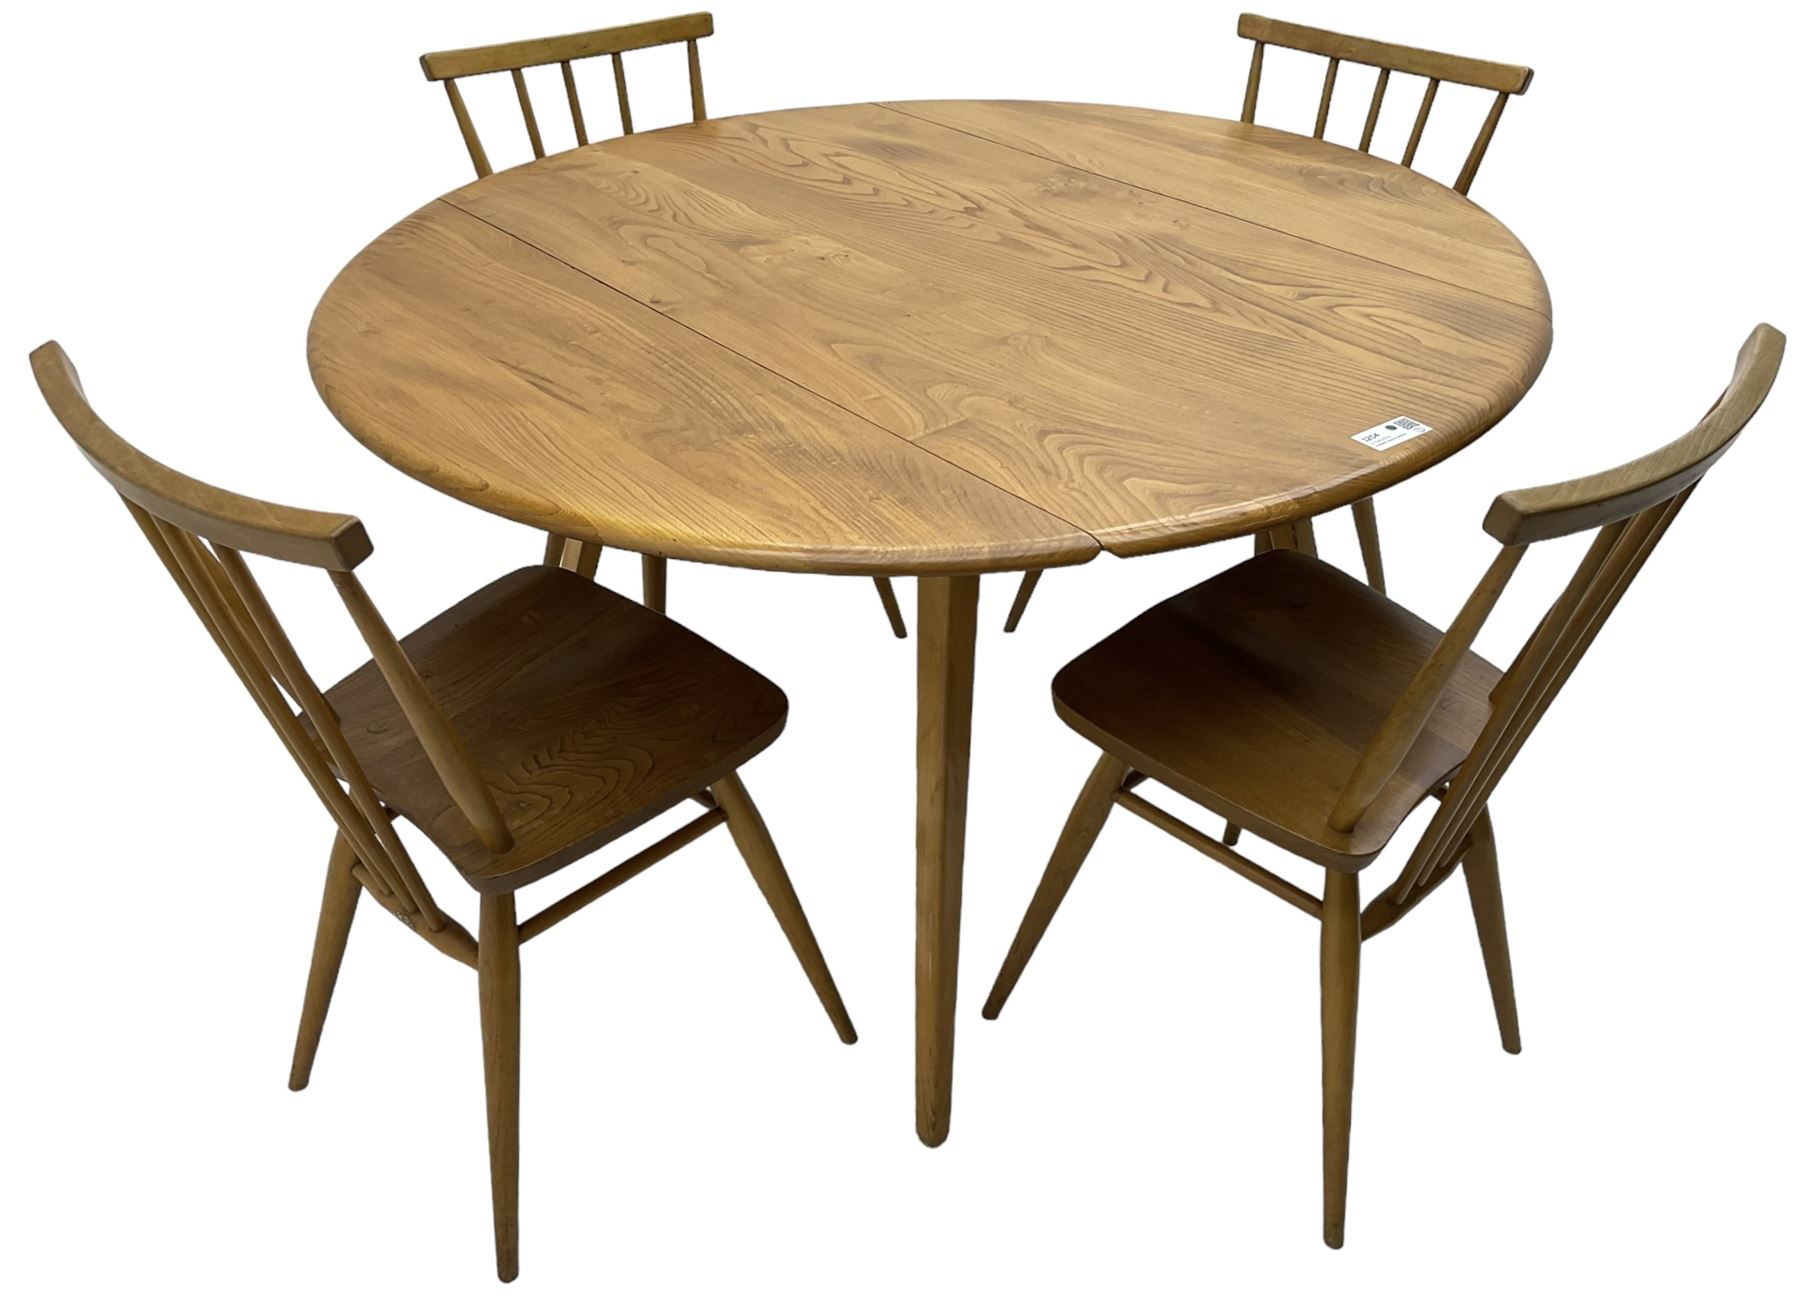 Ercol - elm and beech dining table - Image 3 of 6